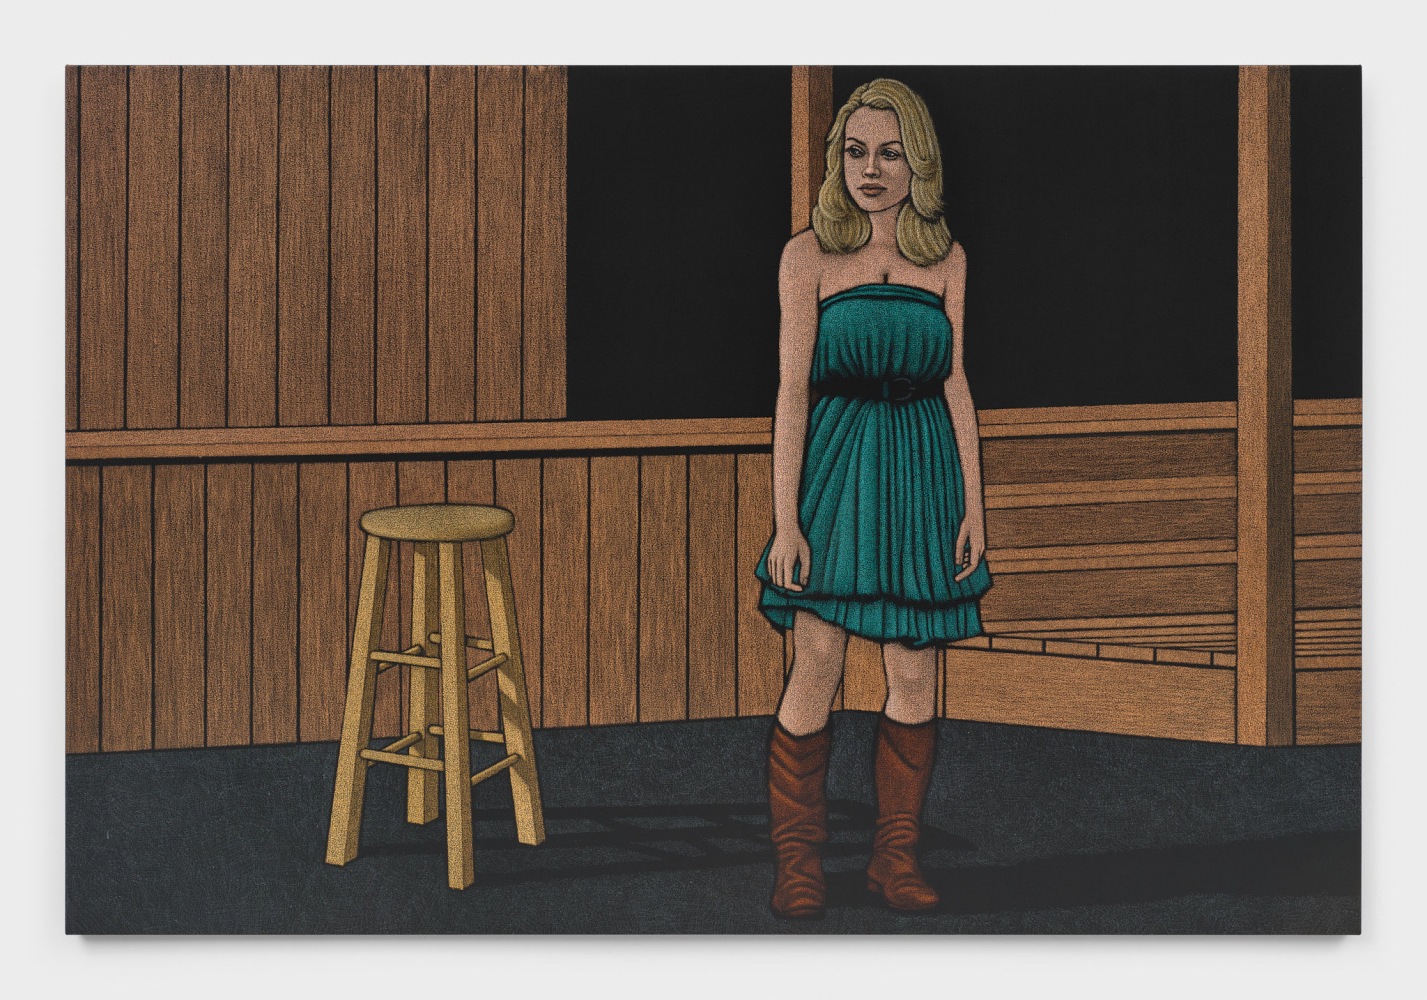 An oil pastel painting of a blonde woman in a teal dress and long brown boots gazing to the right of the canvas in a wooden room with a wooden stool.